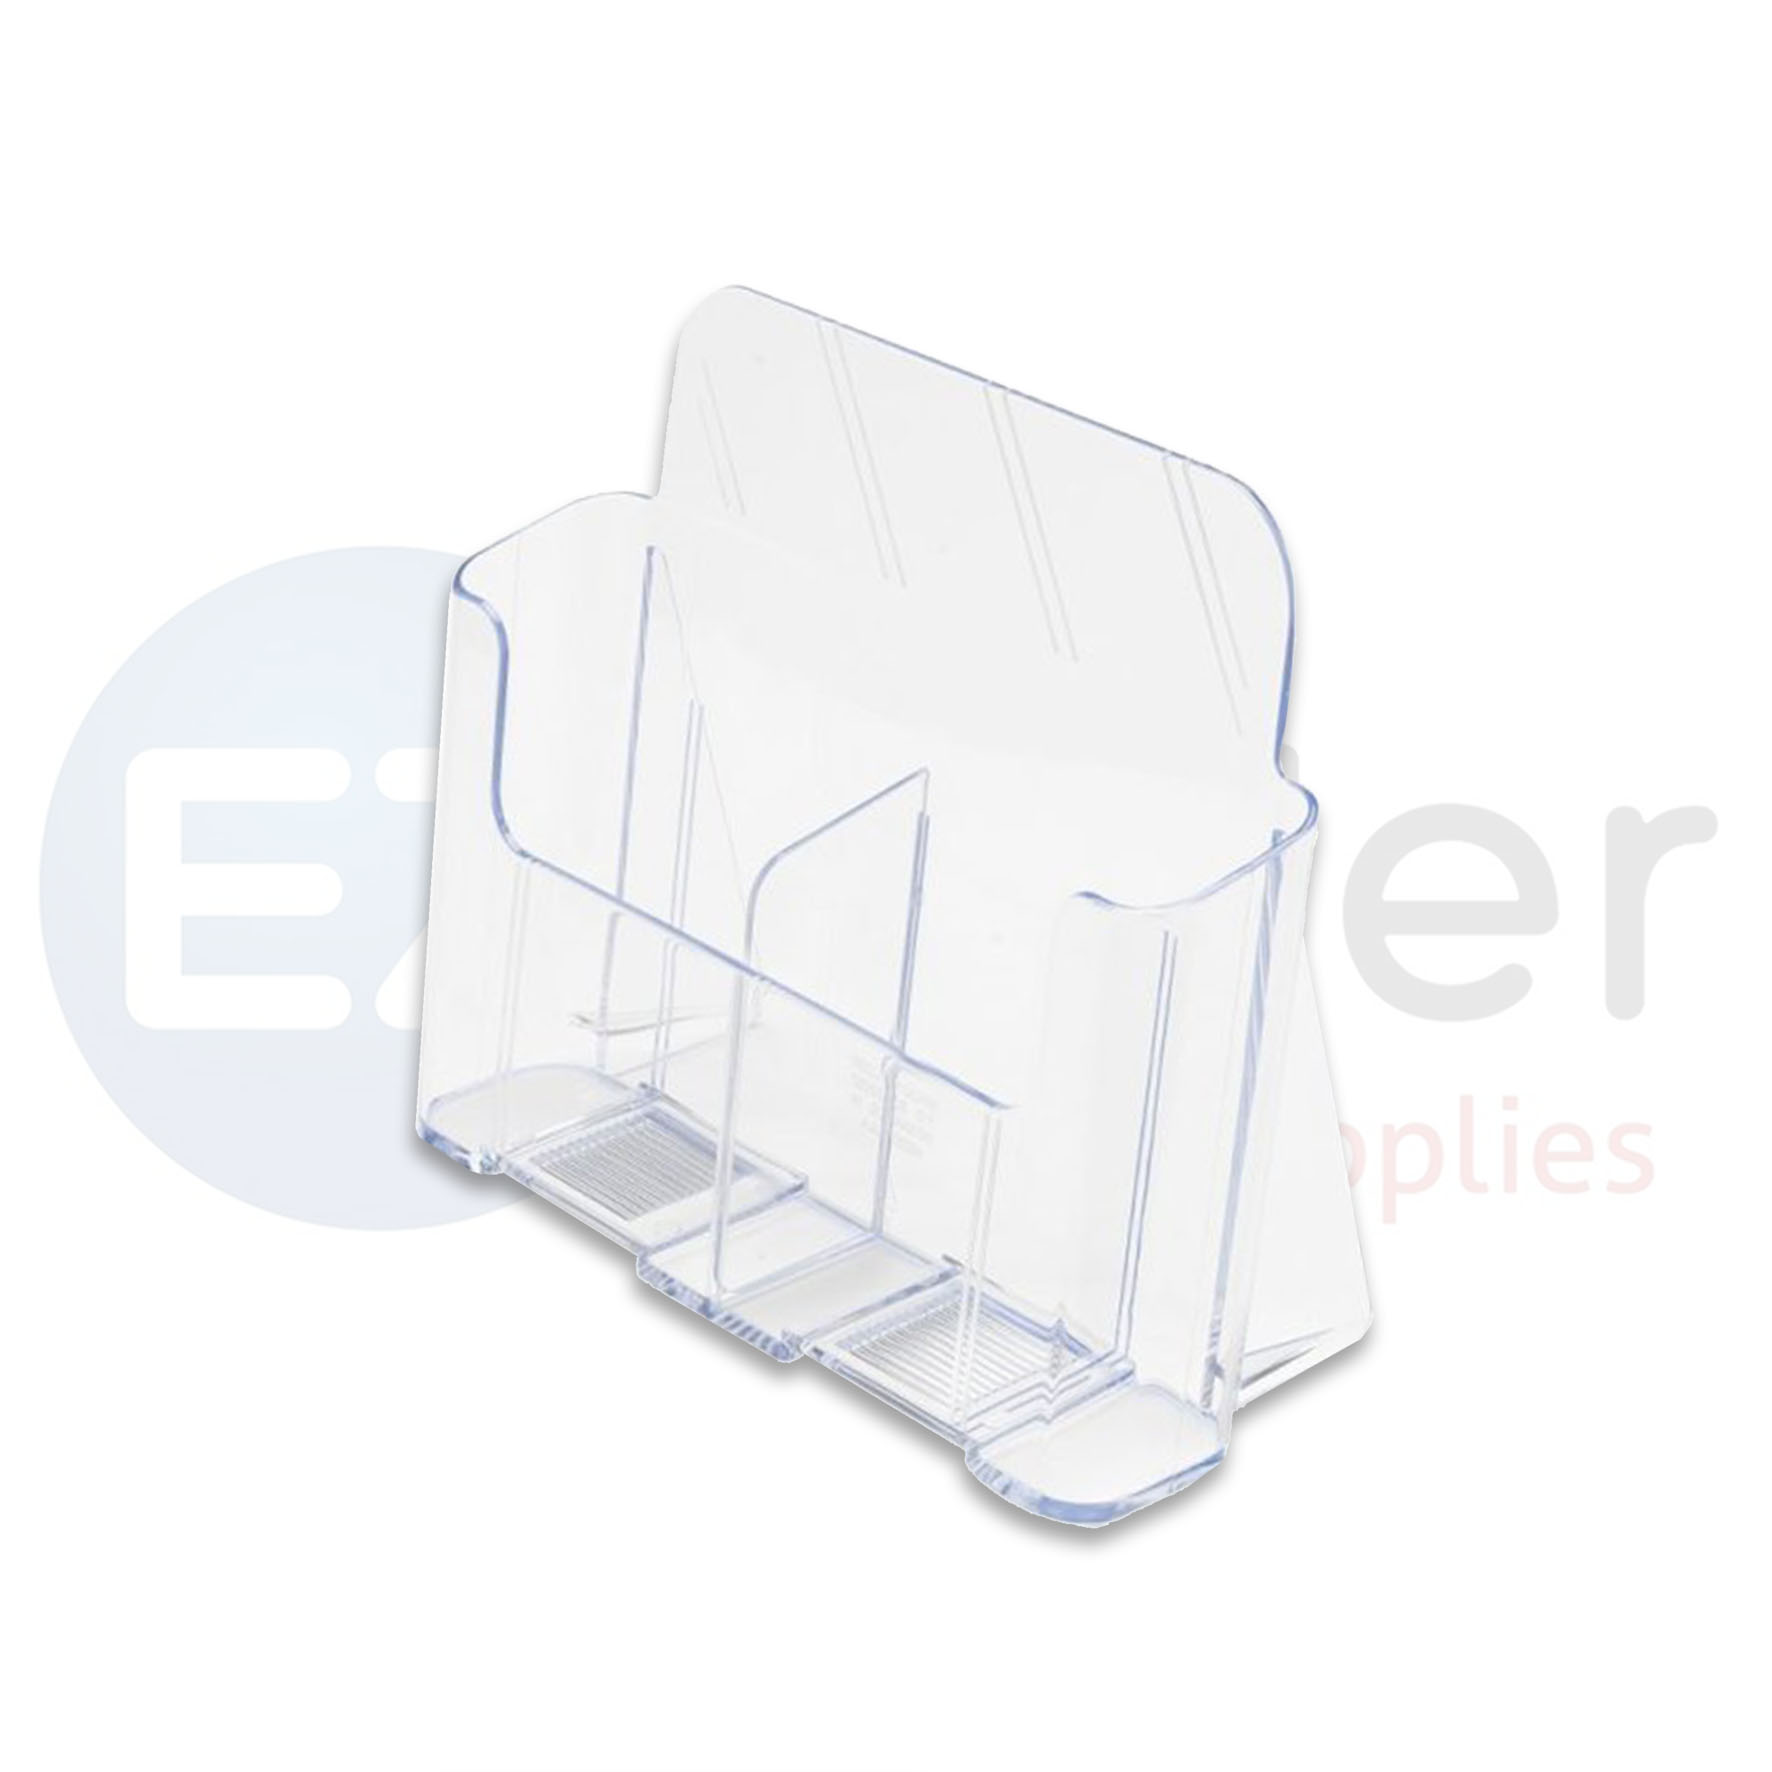 Brochure holder, 2 x A5 low back double